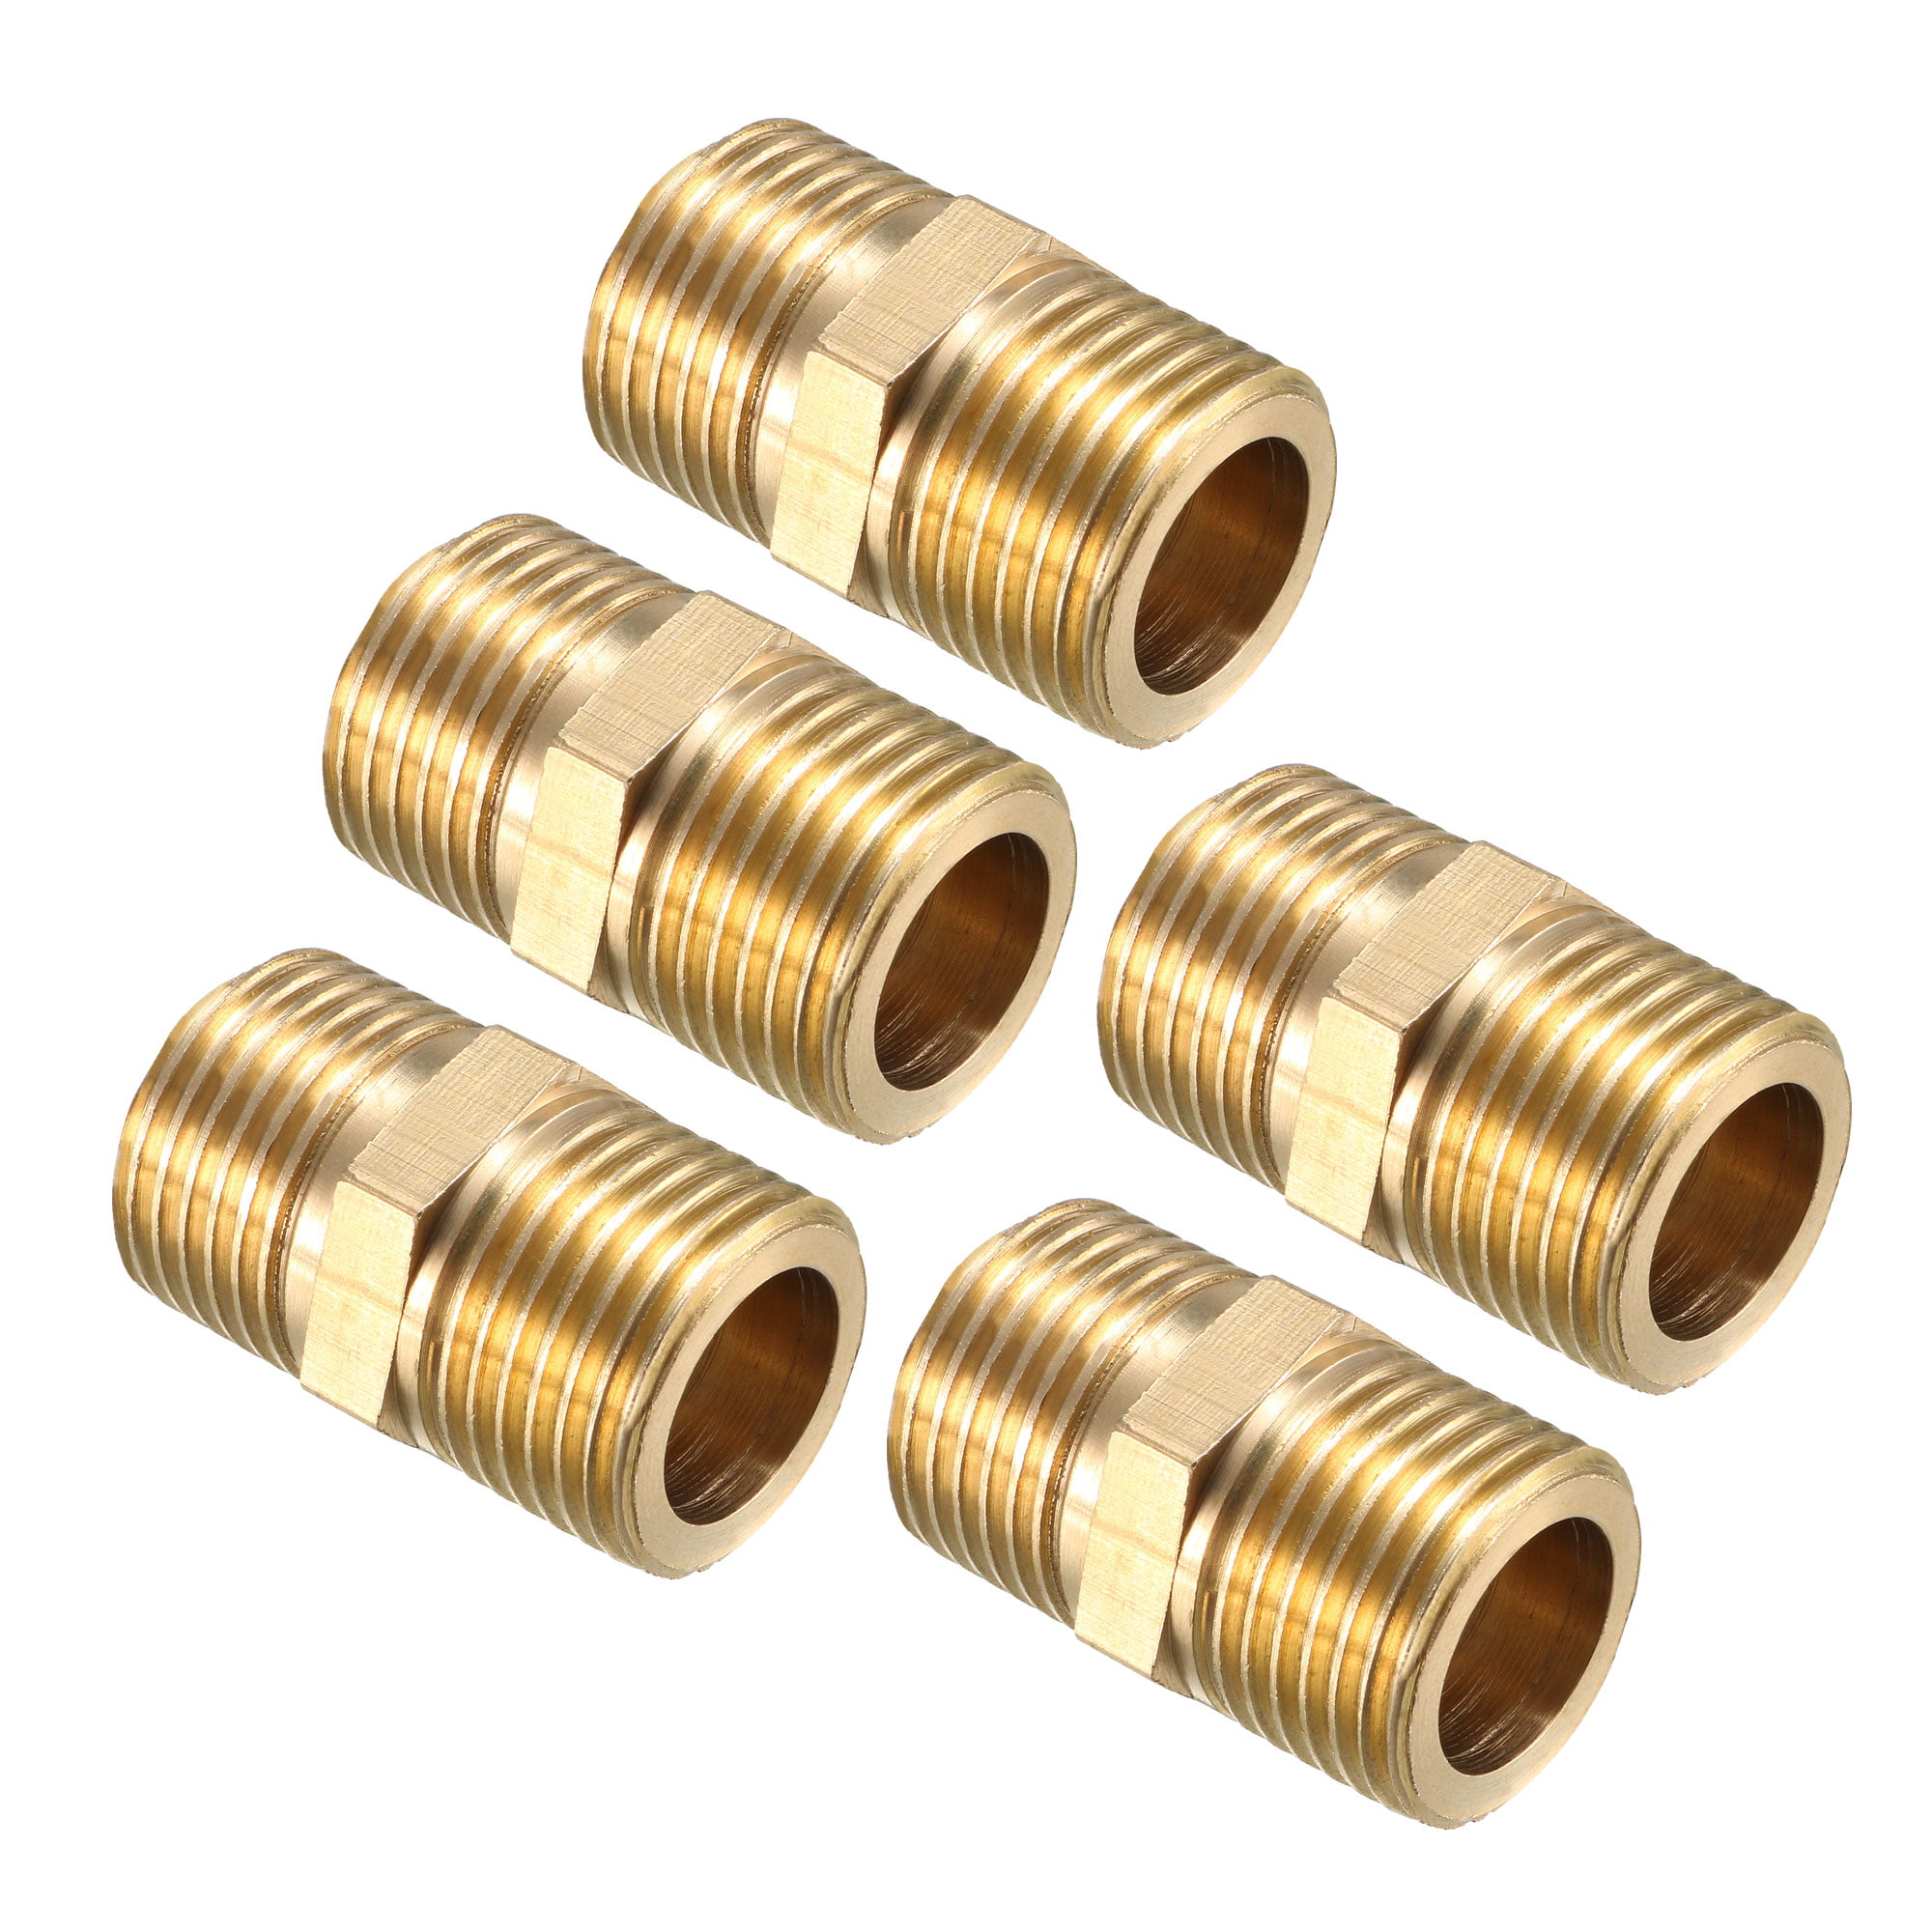 3/8" 5PCS BSPT Brass Male to Male Hex Nipple Reducer Connector Adapter 